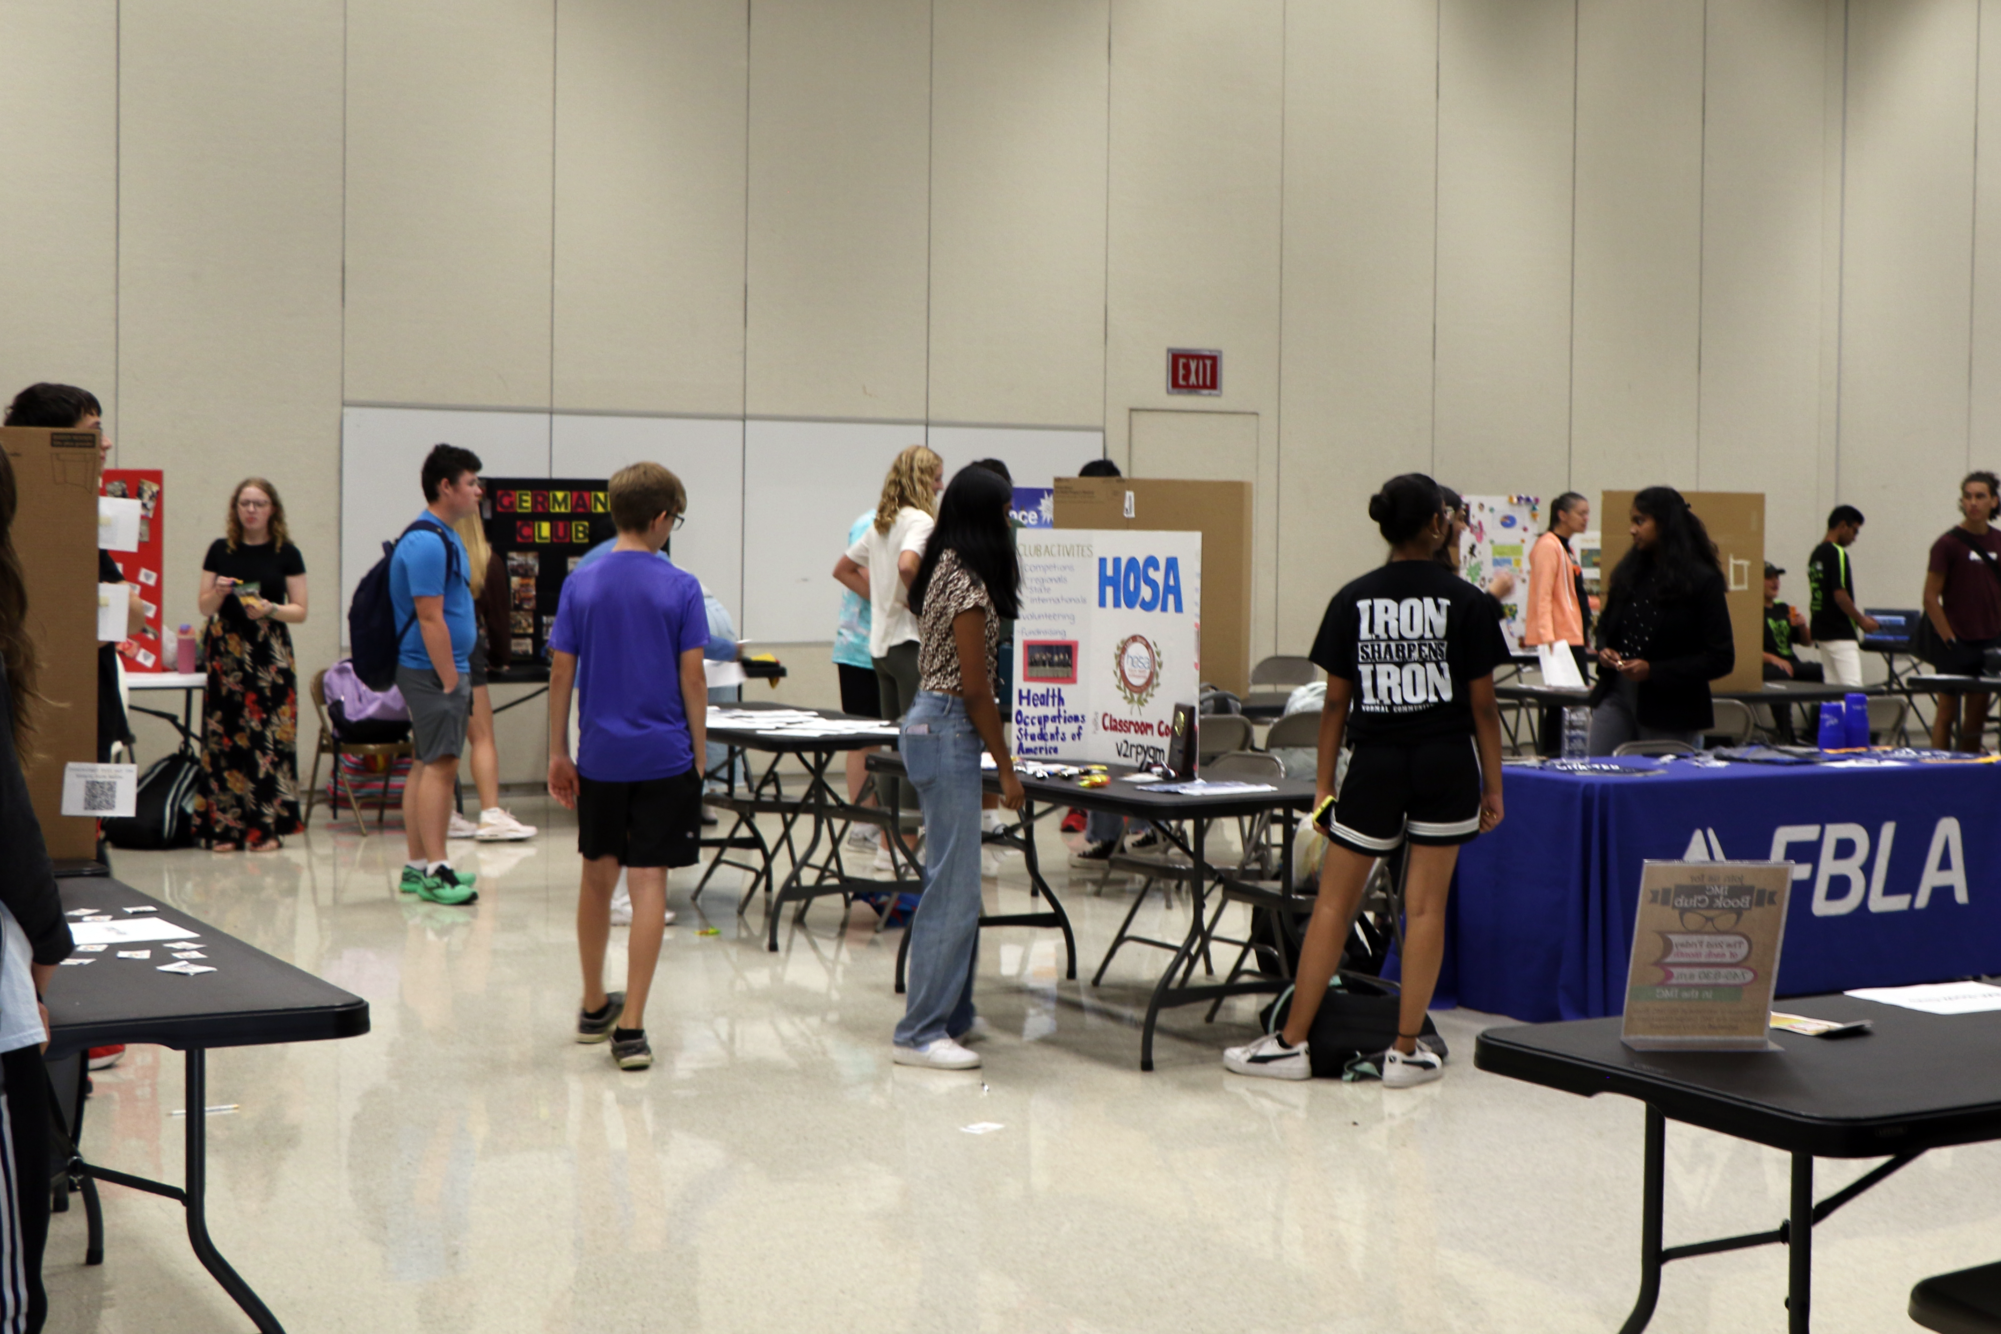 Activity+Fair+showcases+array+of+student+clubs%2C+organizations+at+Community